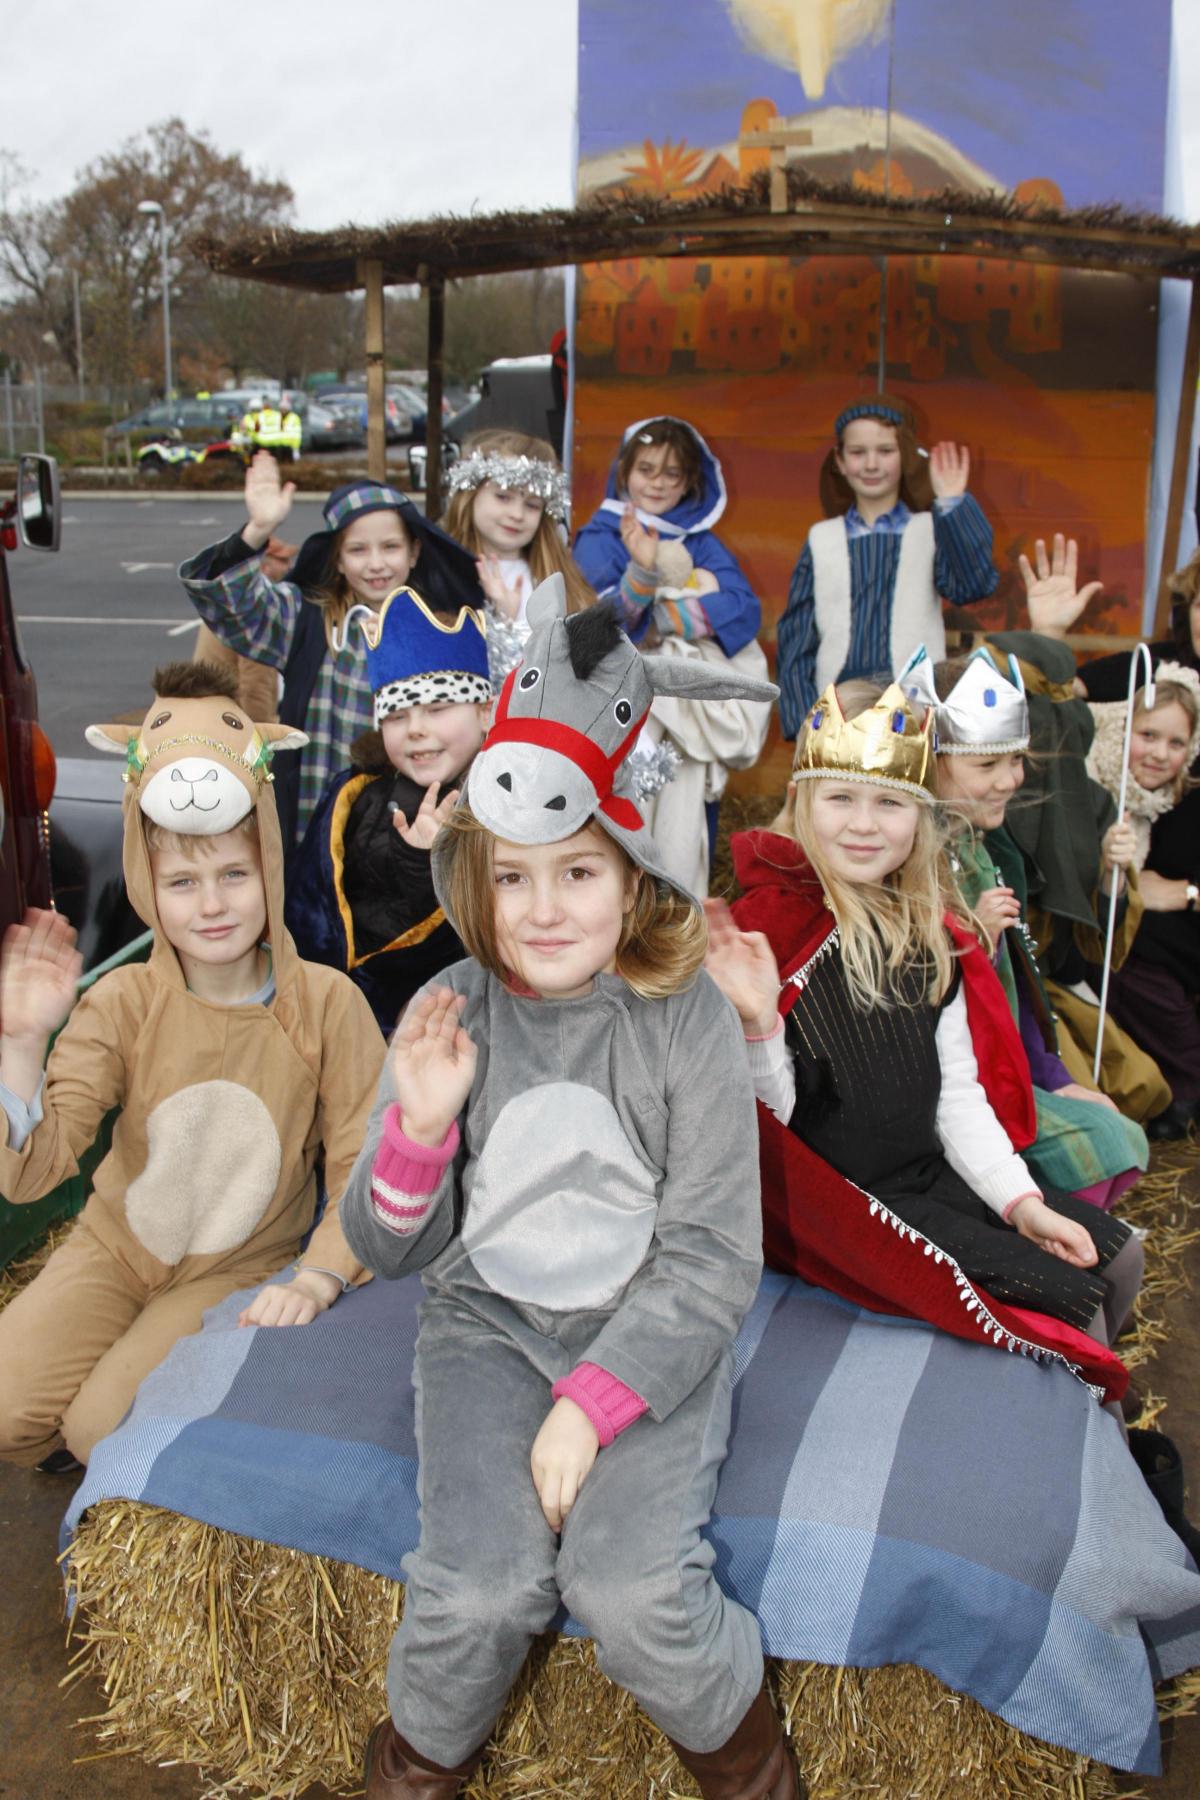 All our pictures from Wimborne's Save the Children Christmas parade on Saturday December 14, 2013